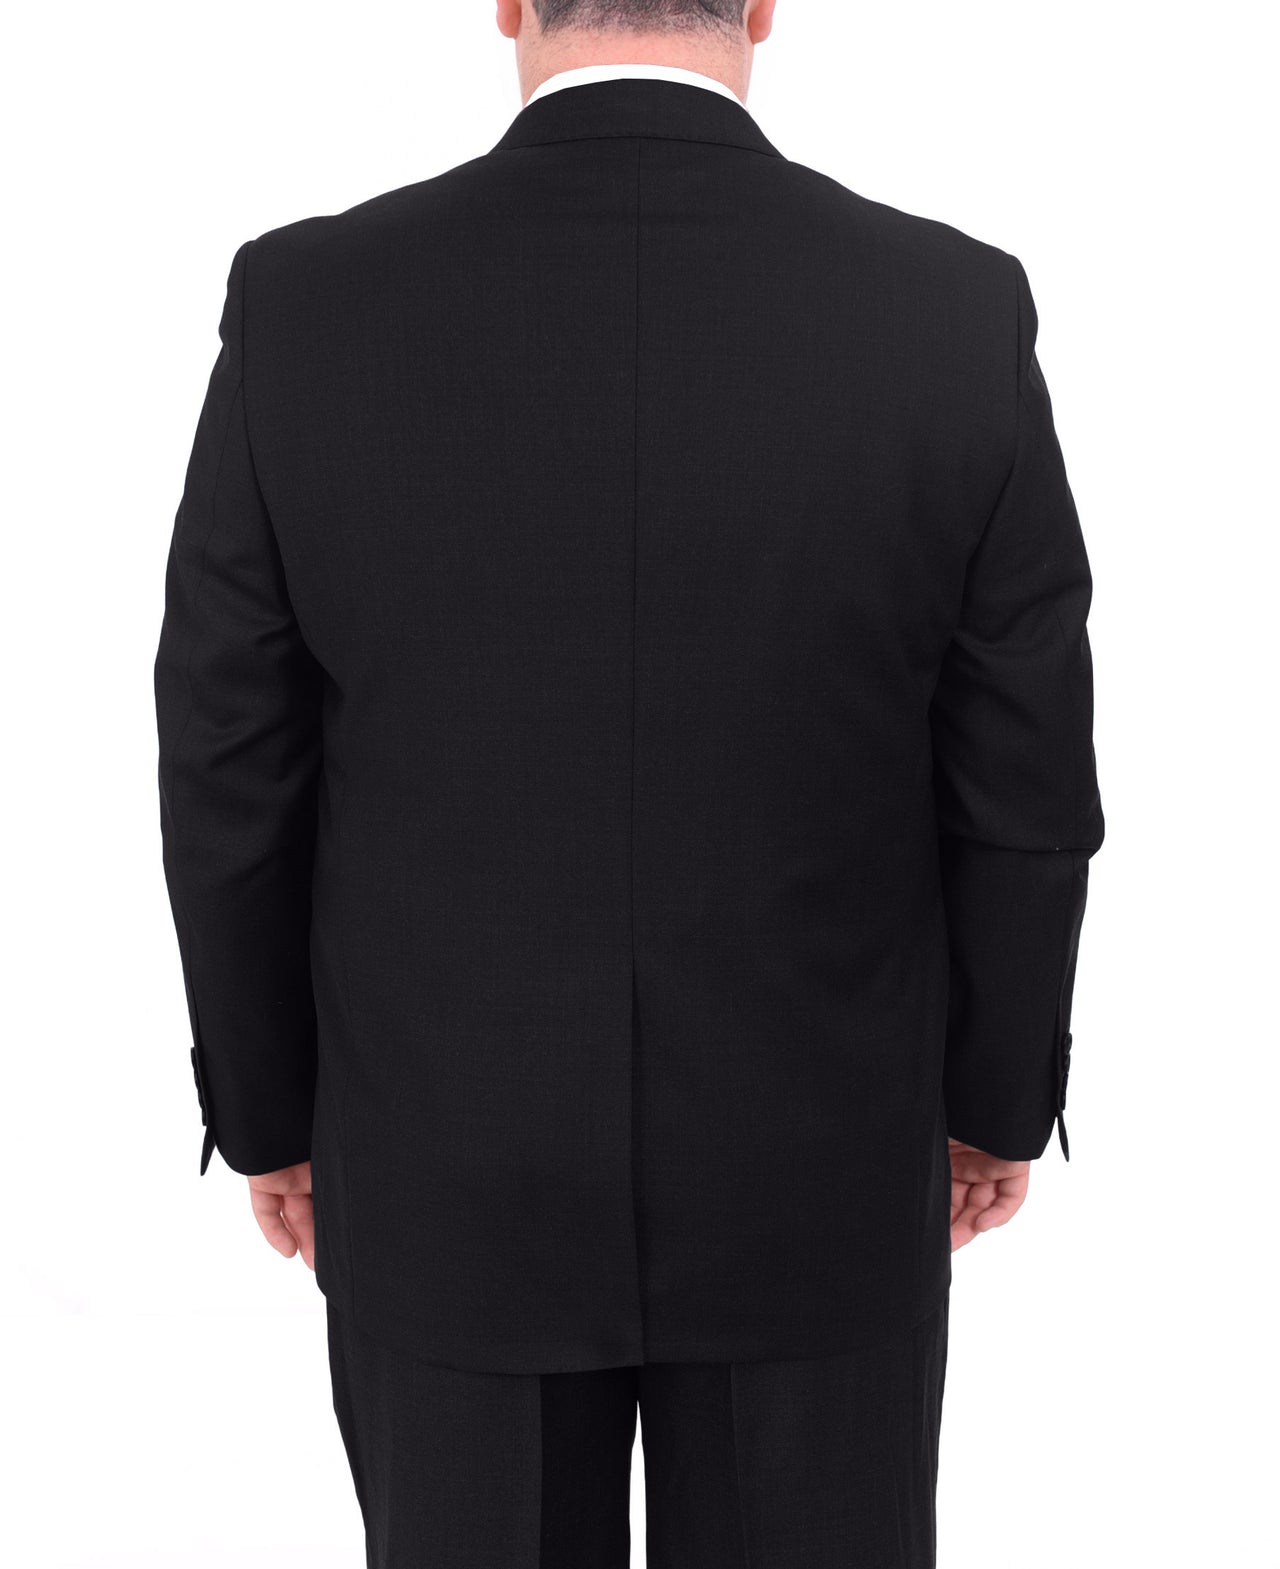 Men's Portly Fit Executive Cut Solid Black Two Button 2 Piece Wool Suit